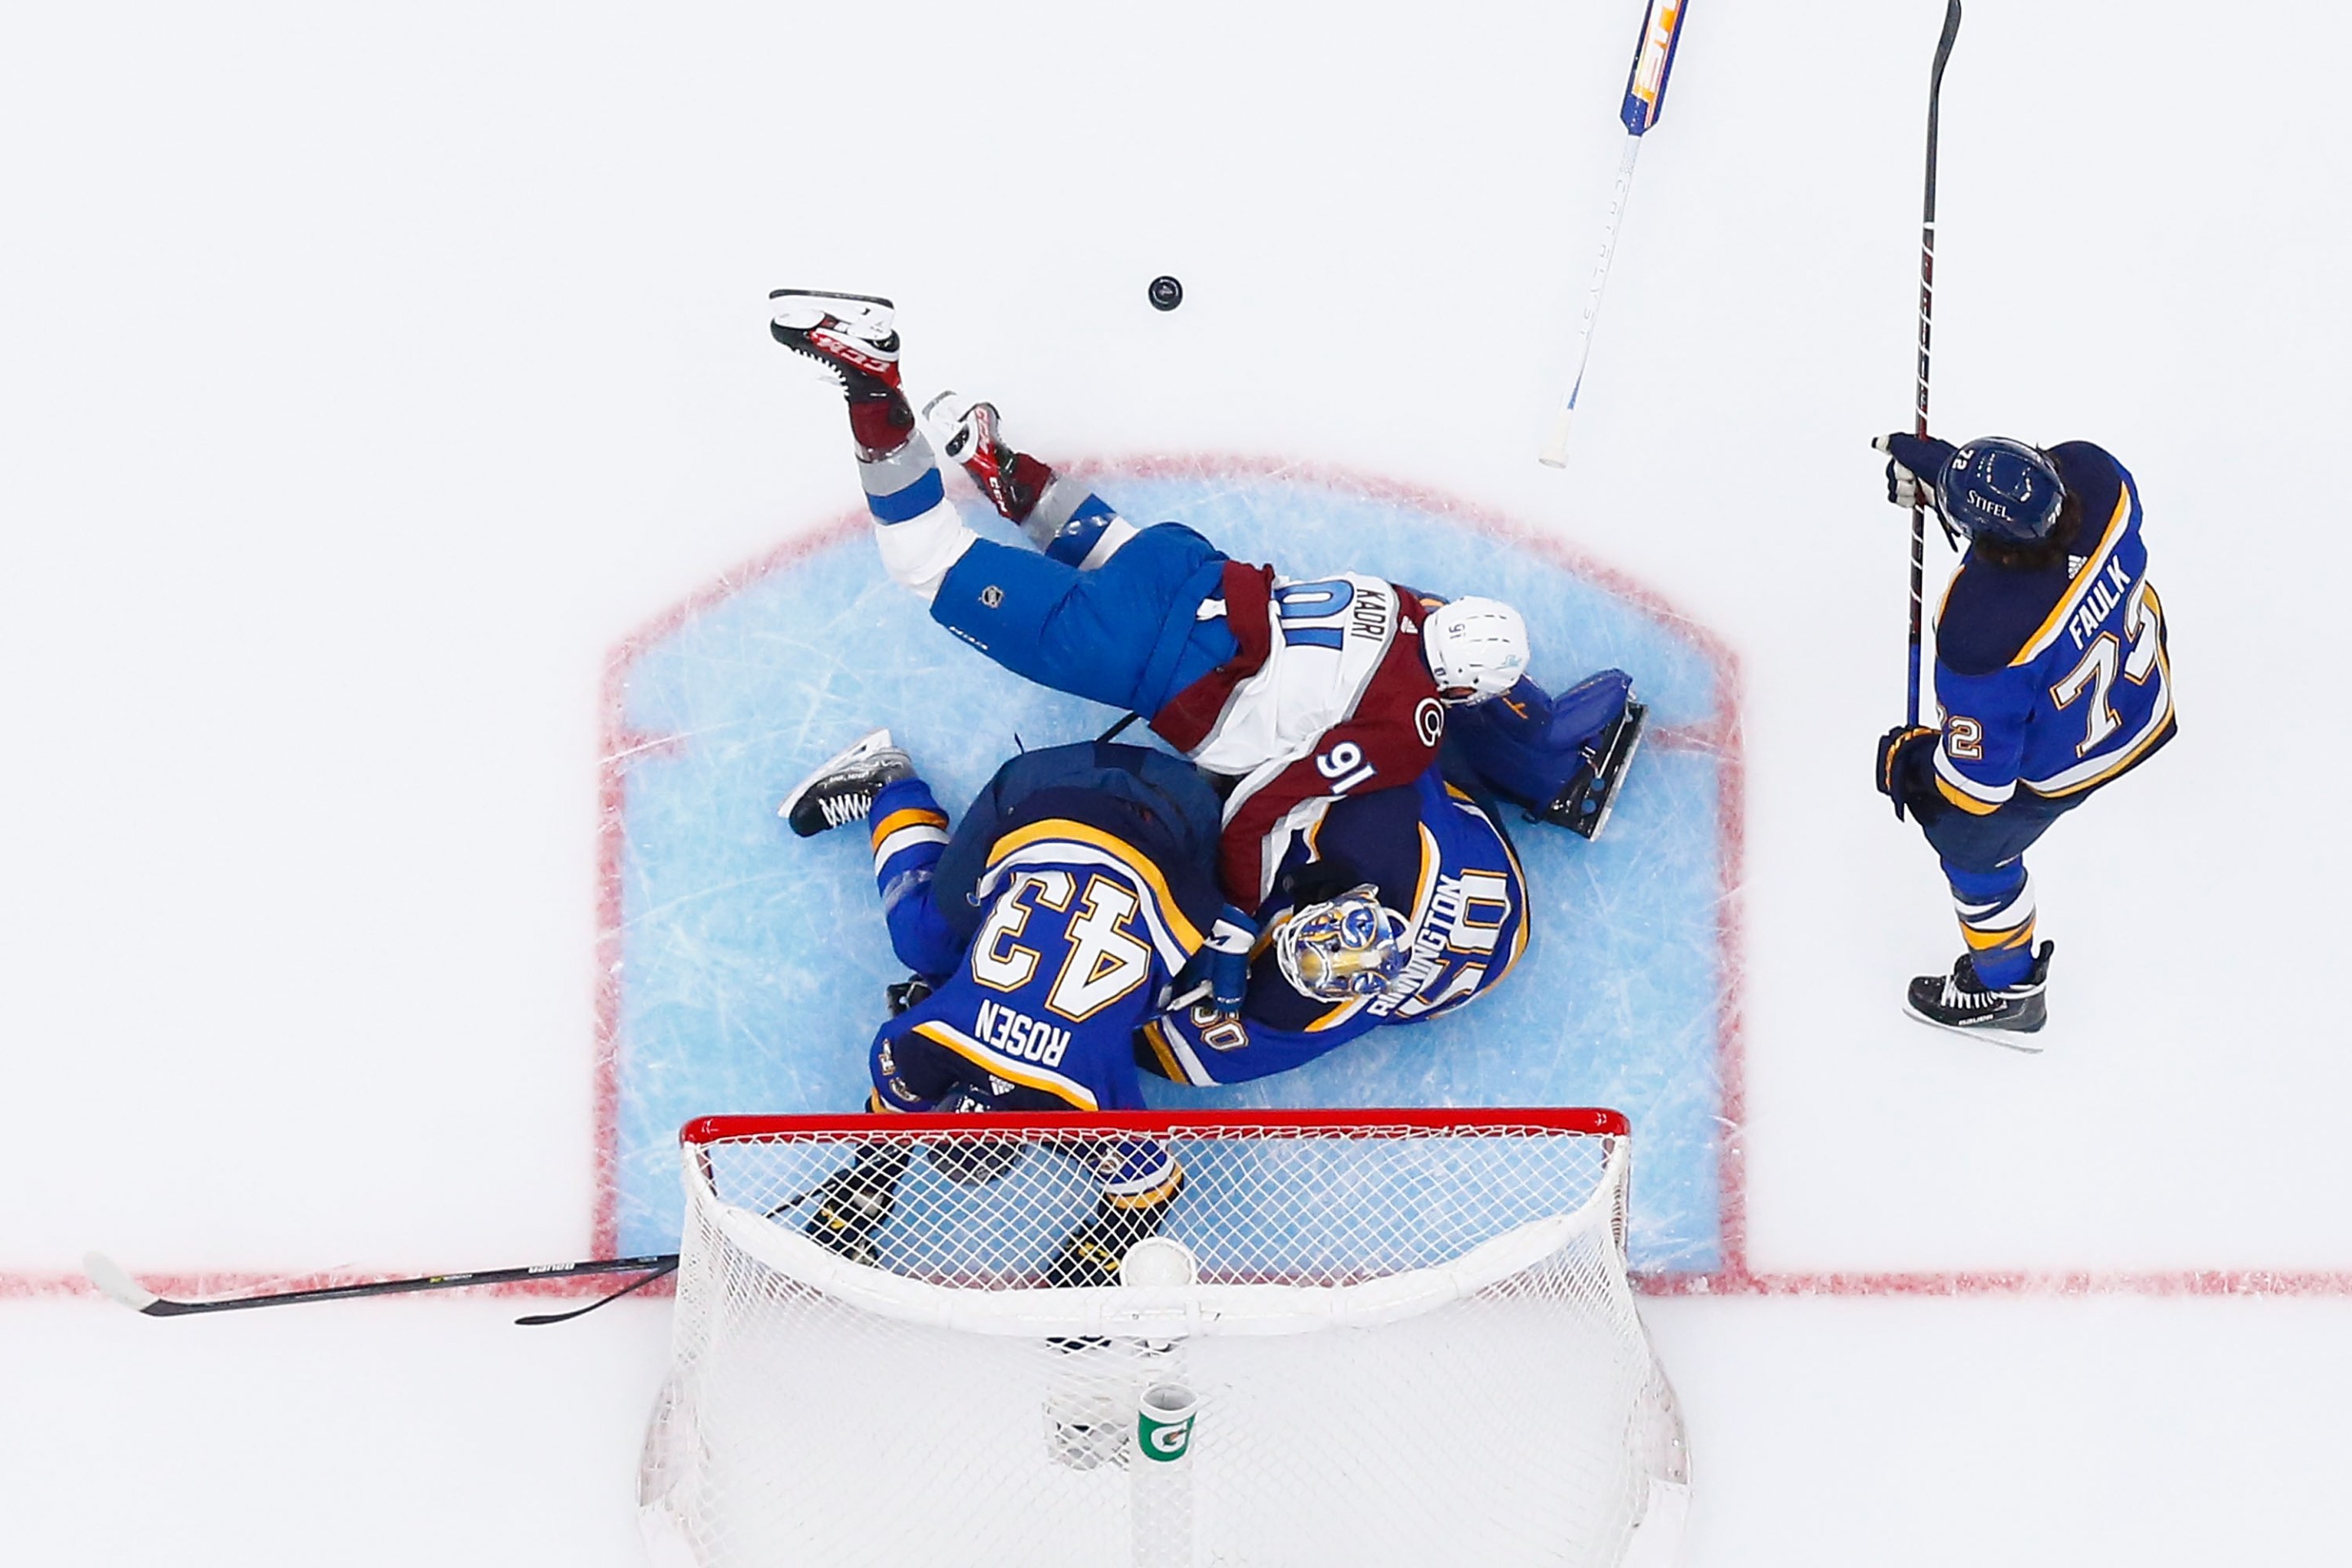 Nazem Kadri #91 of the Colorado Avalanche falls over goaltender Jordan Binnington #50 of the St. Louis Blues in the first period during Game Three of the Second Round of the 2022 Stanley Cup Playoffs at Enterprise Center on May 21, 2022 in St Louis, Missouri.